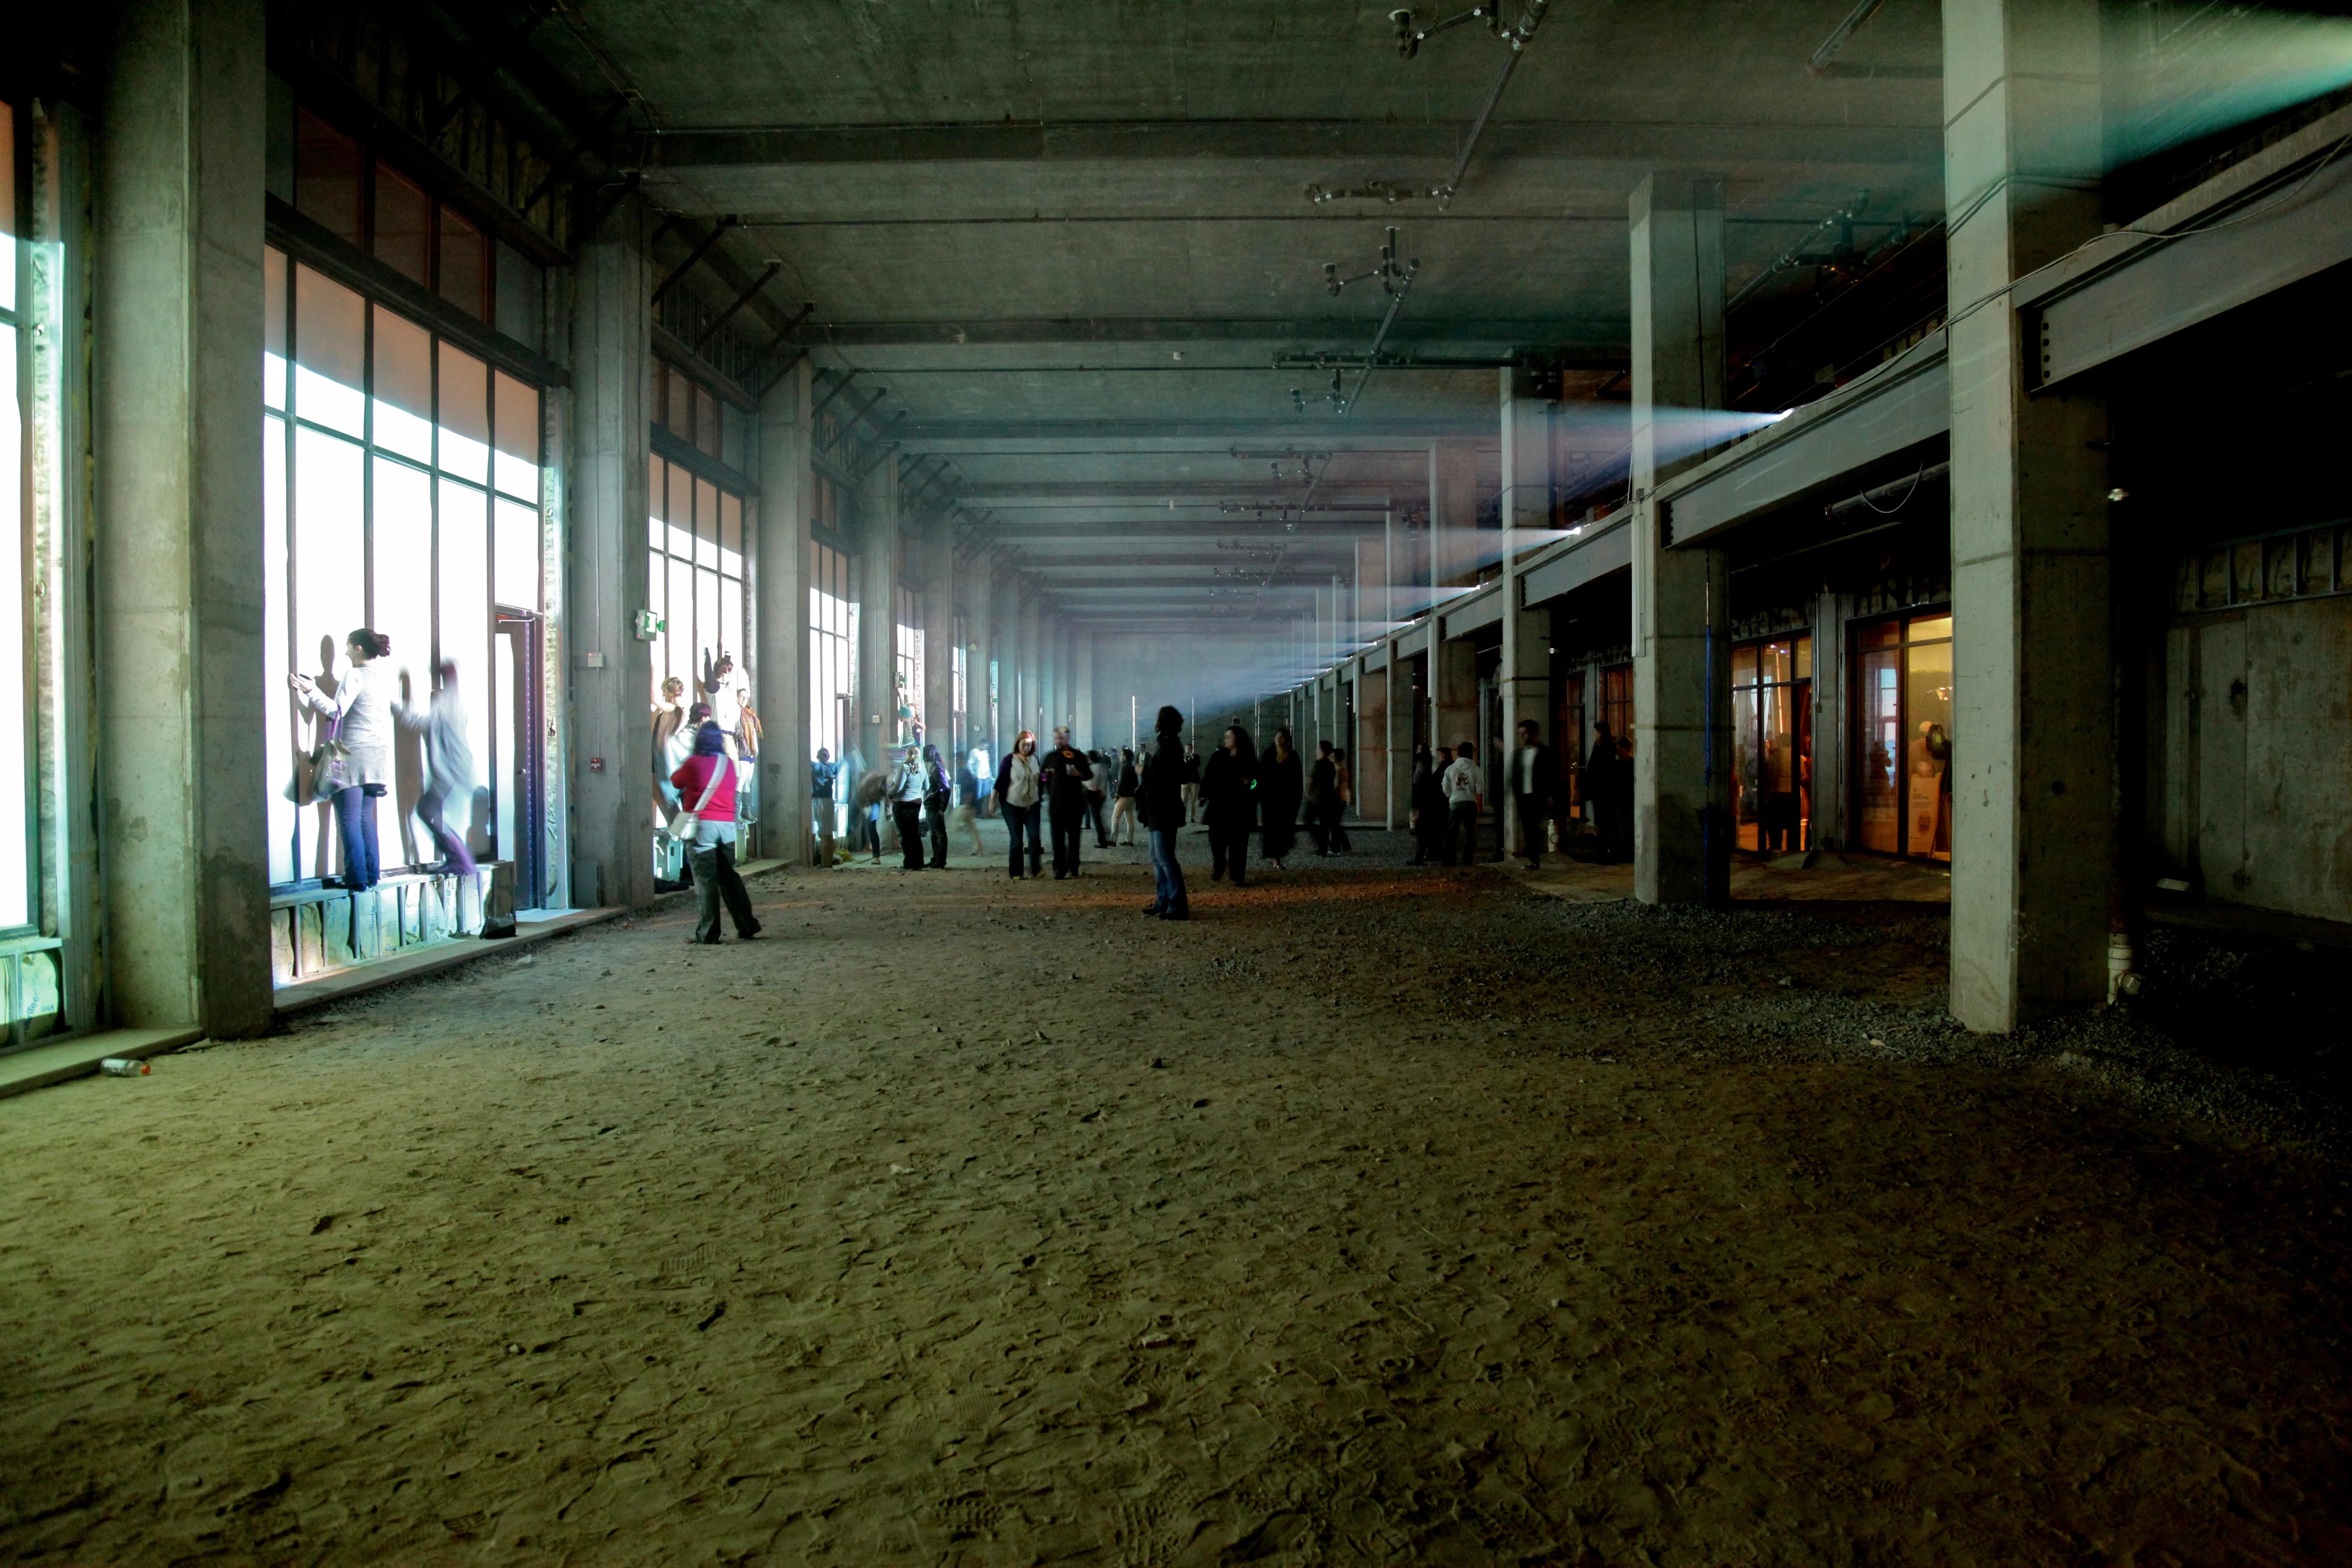 Photograph of a relatively dark, cavernous space (like the inside of an large, empty commercial building) with art festival goers milling about, some of whom have climbed into the windows to interact with what's being projected onto them (the water scene described above). On the upper left of the photograph one can see a line of about a dozen projectors shining light across the empty space onto the windows.